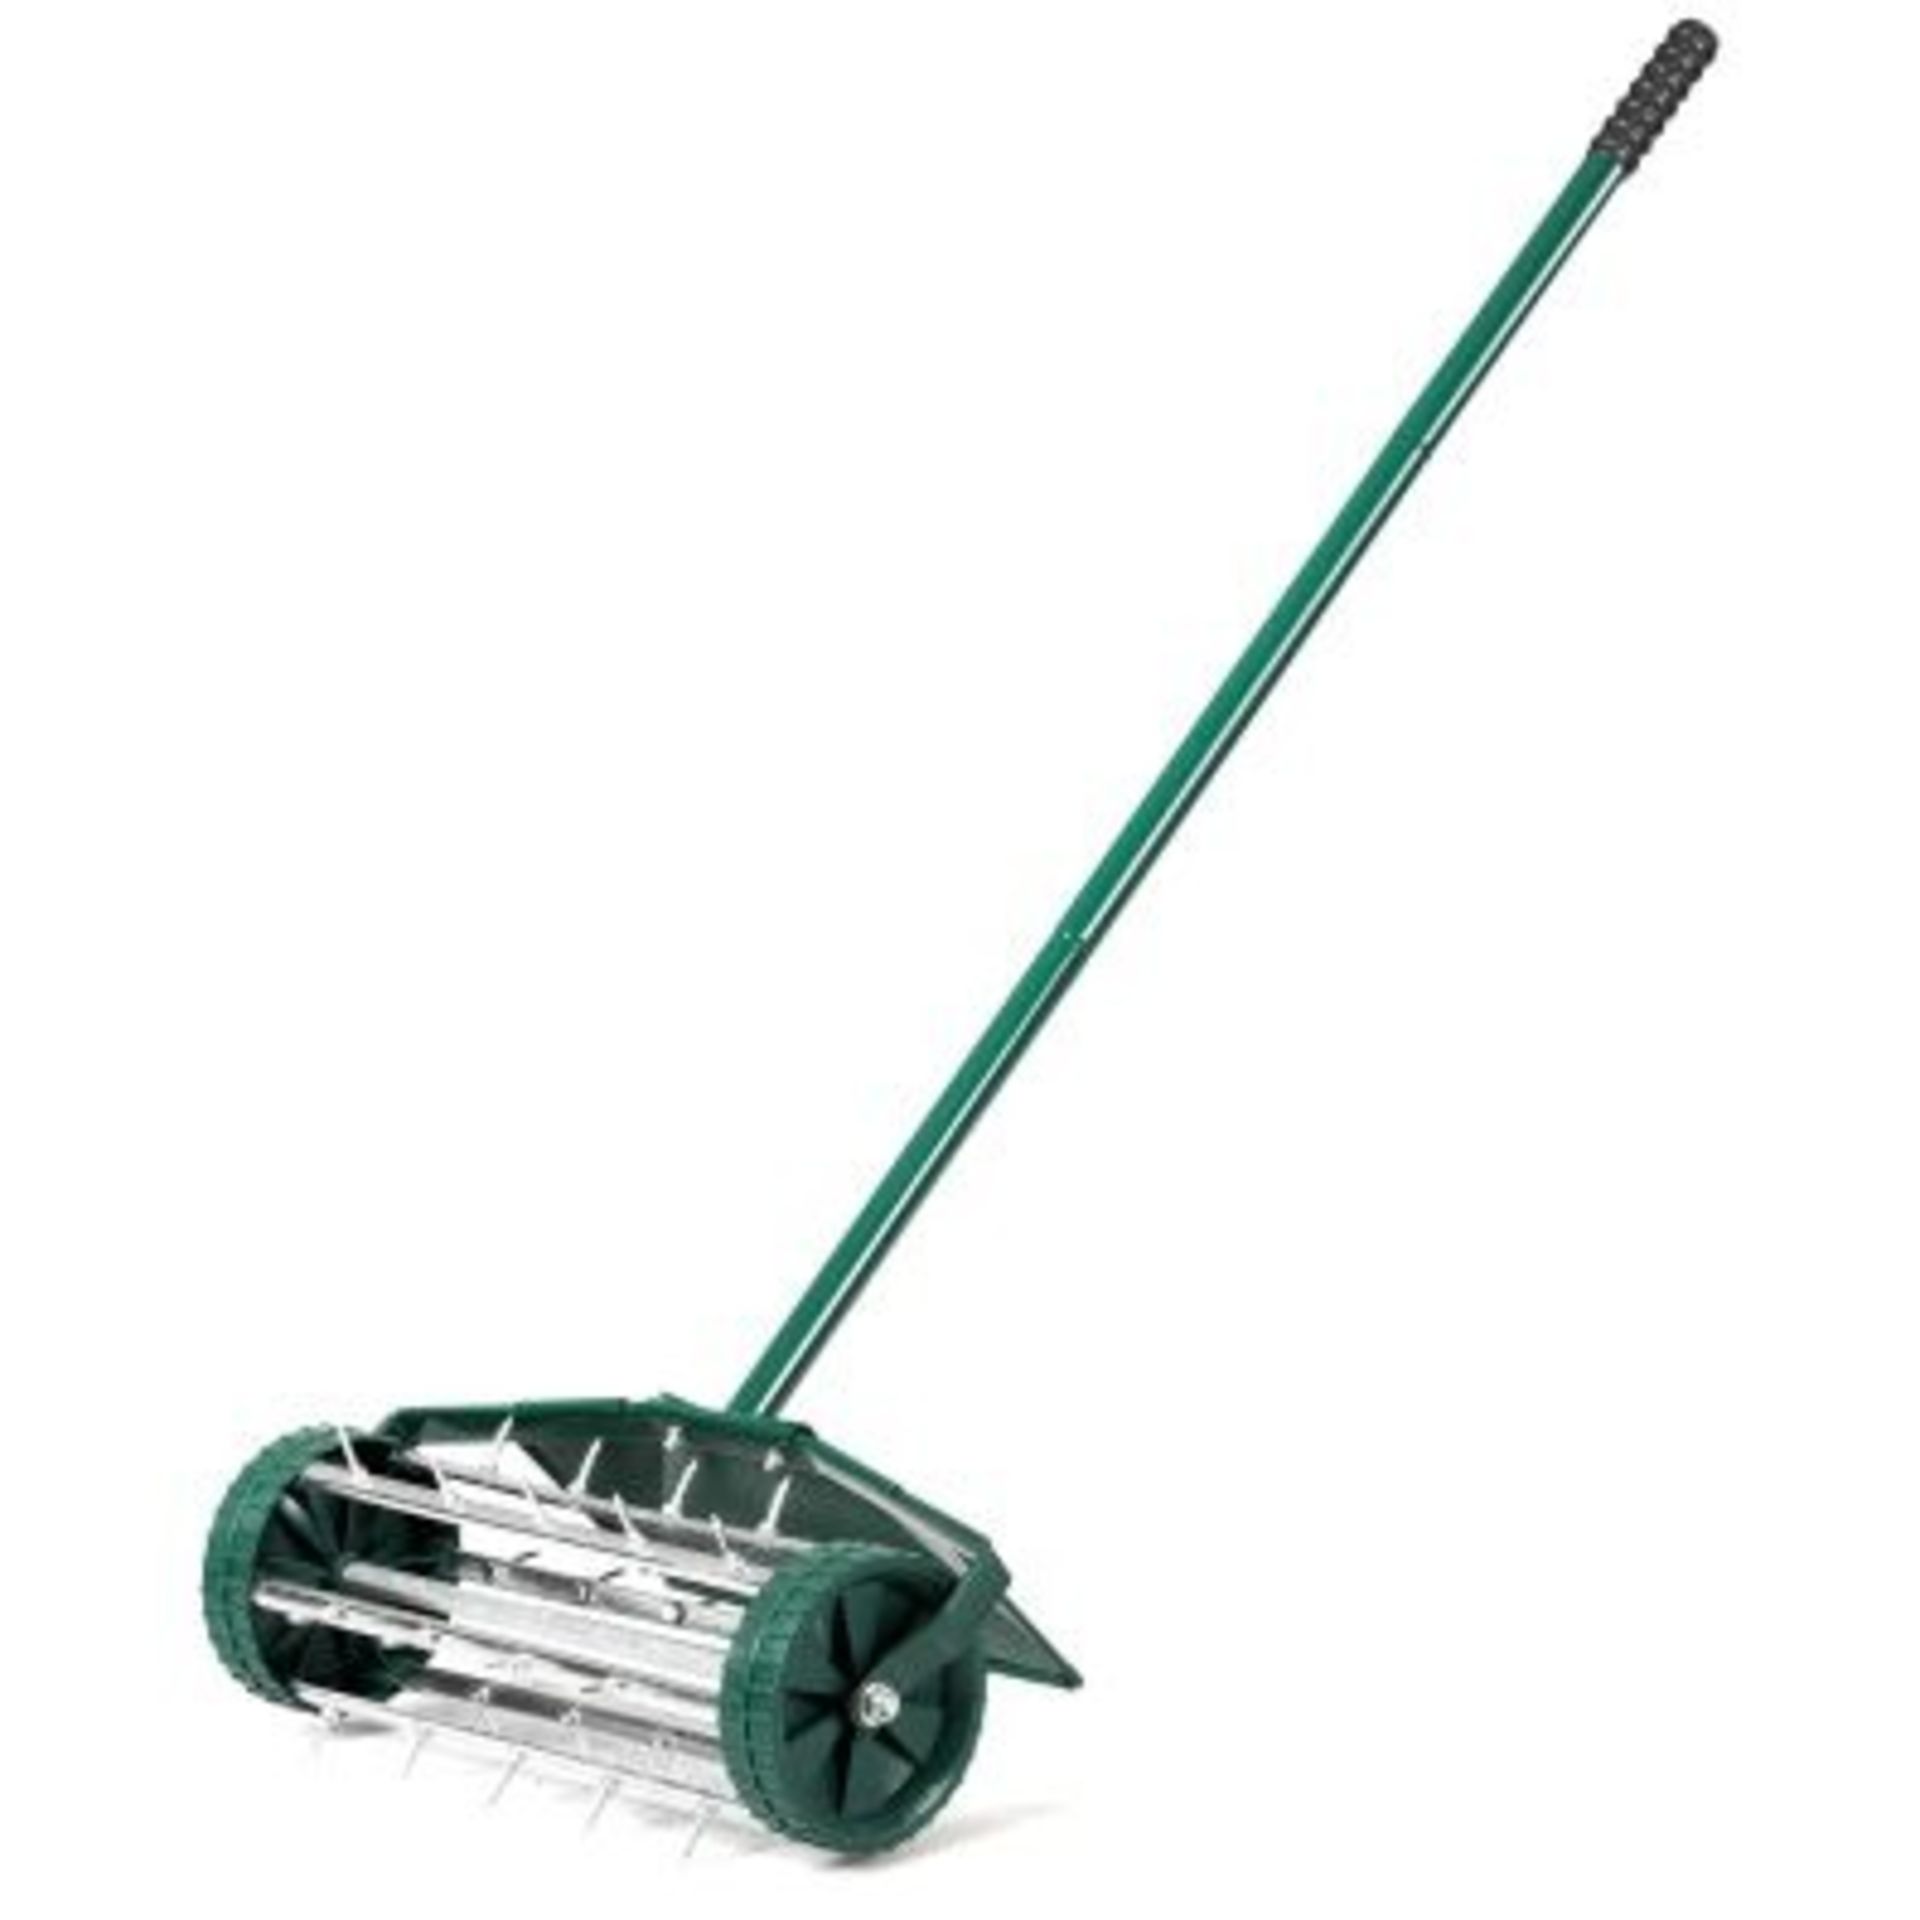 Lawn Spike Aerators Manual Grass Roller with Protective Fender - ER53